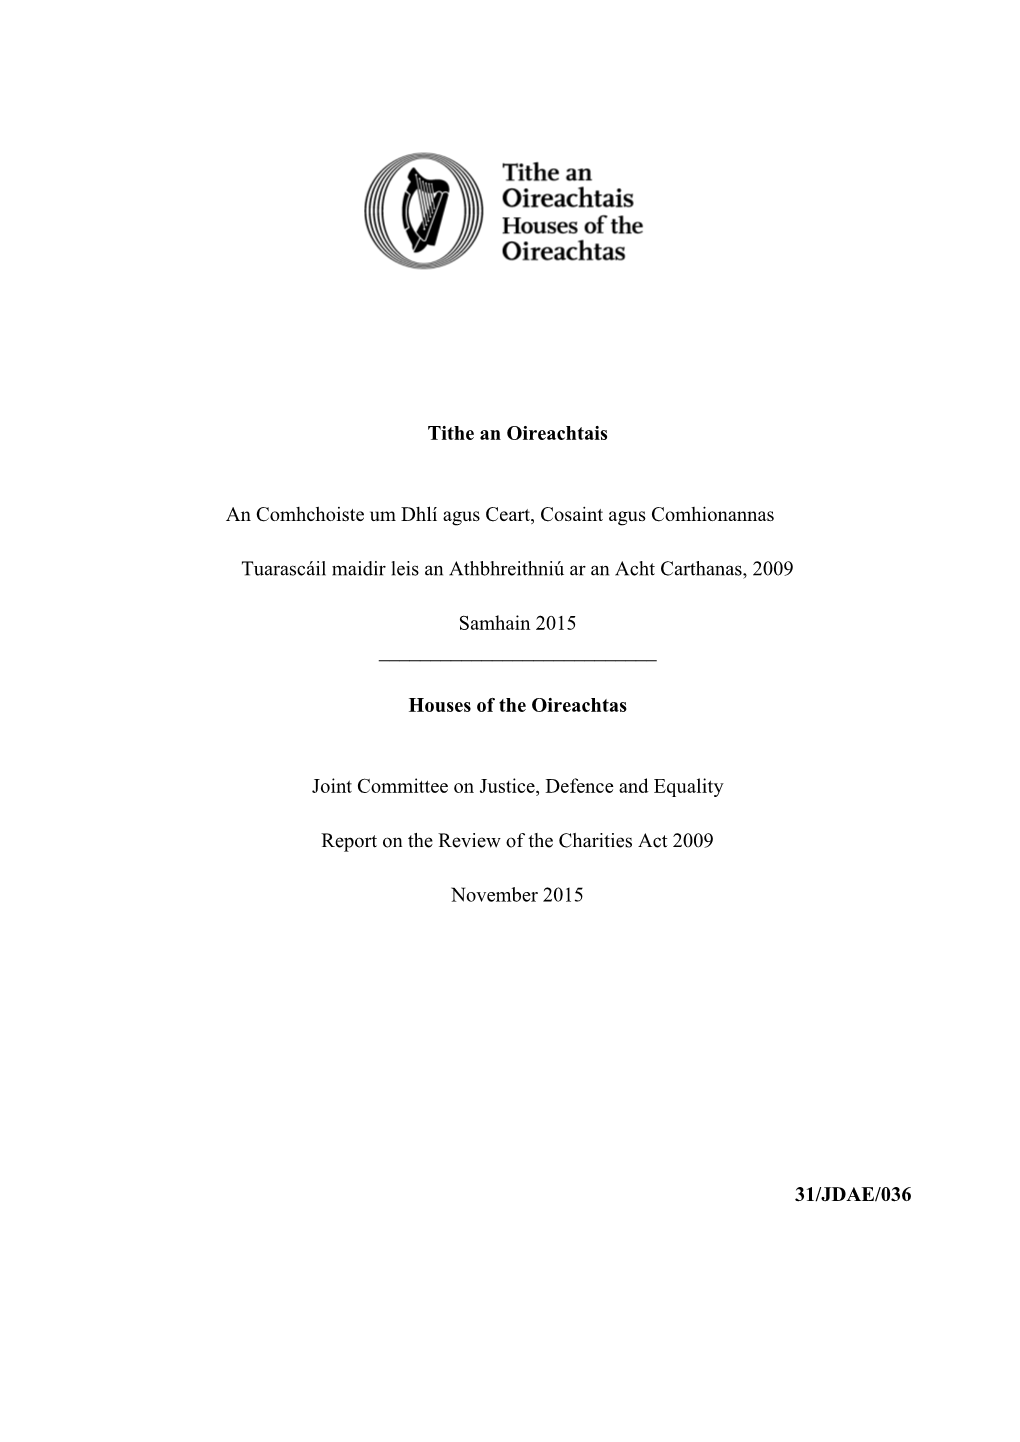 Report on the Review of the Charities Act 2009